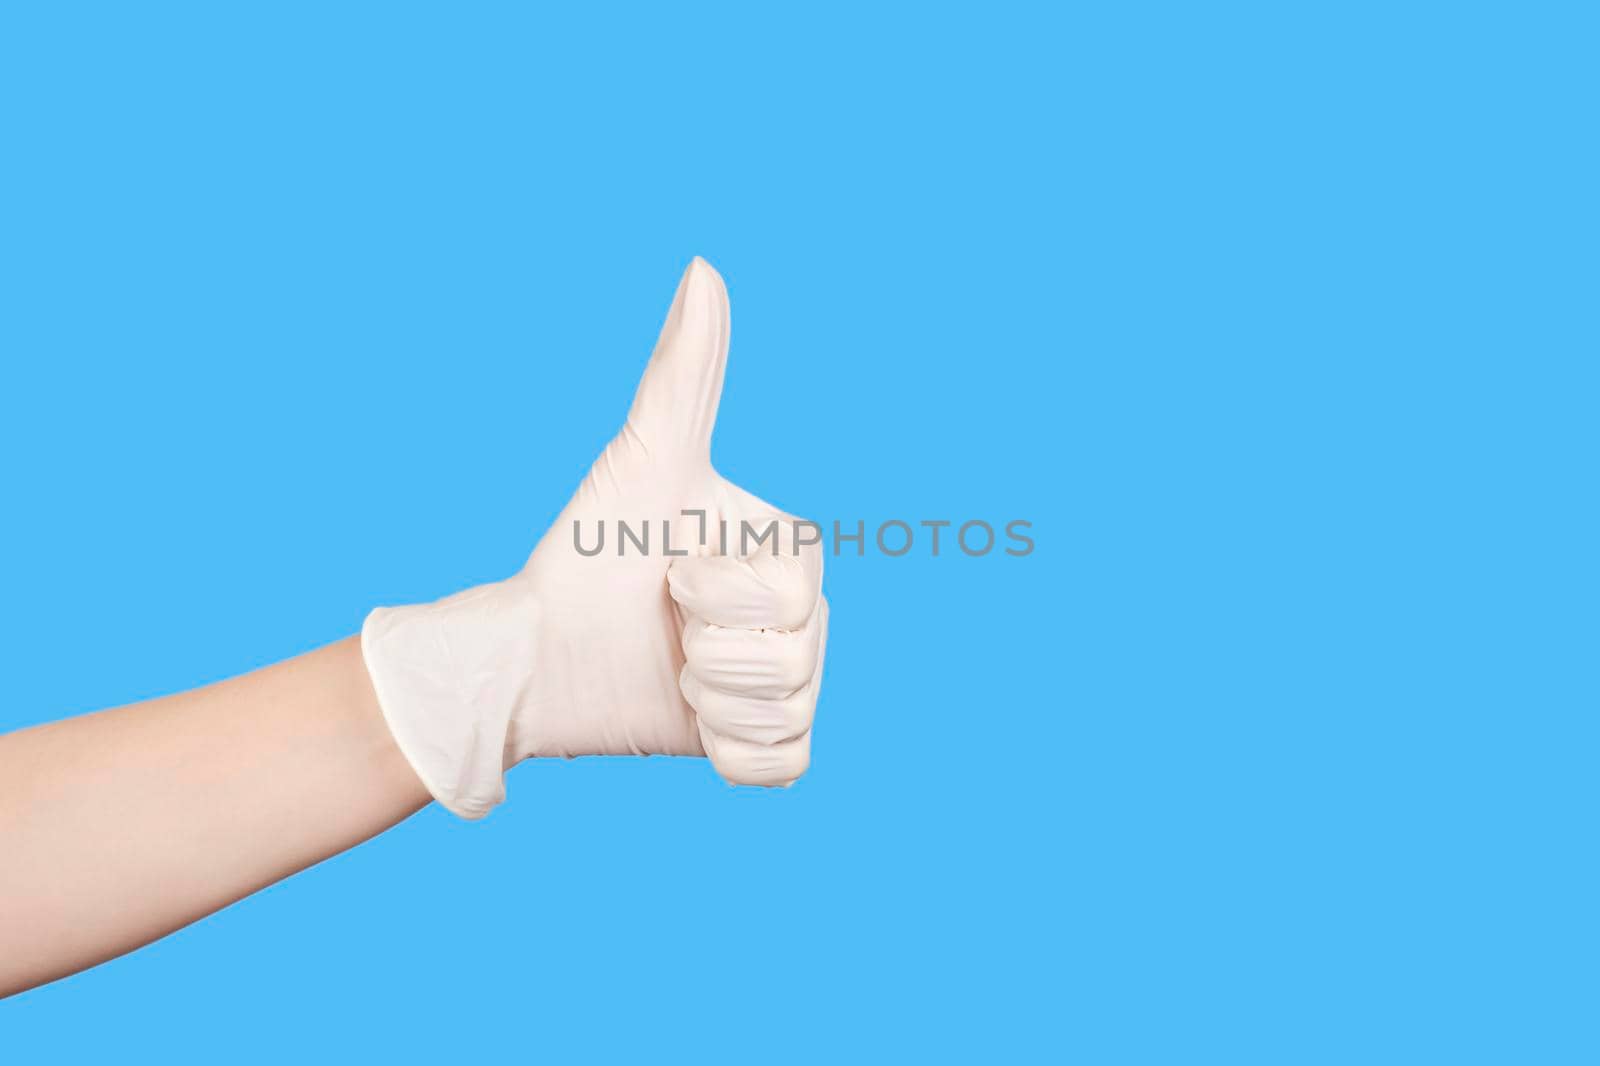 Hand gesture. Hand in a white latex glove showing thumbs up sign isolated on white background. Copy space